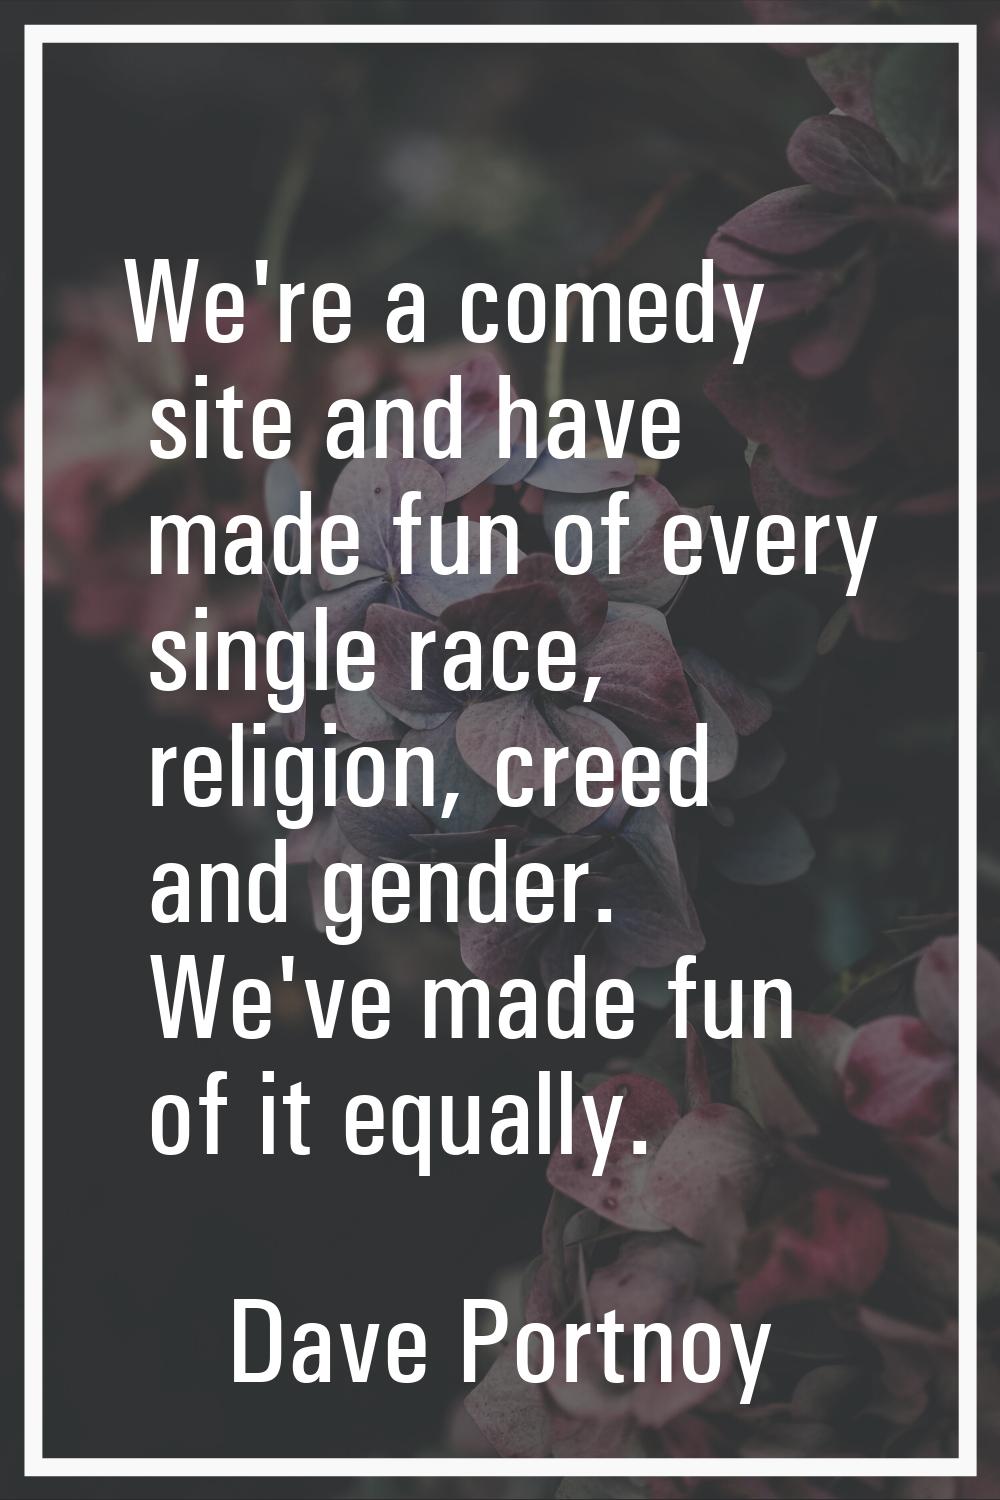 We're a comedy site and have made fun of every single race, religion, creed and gender. We've made 